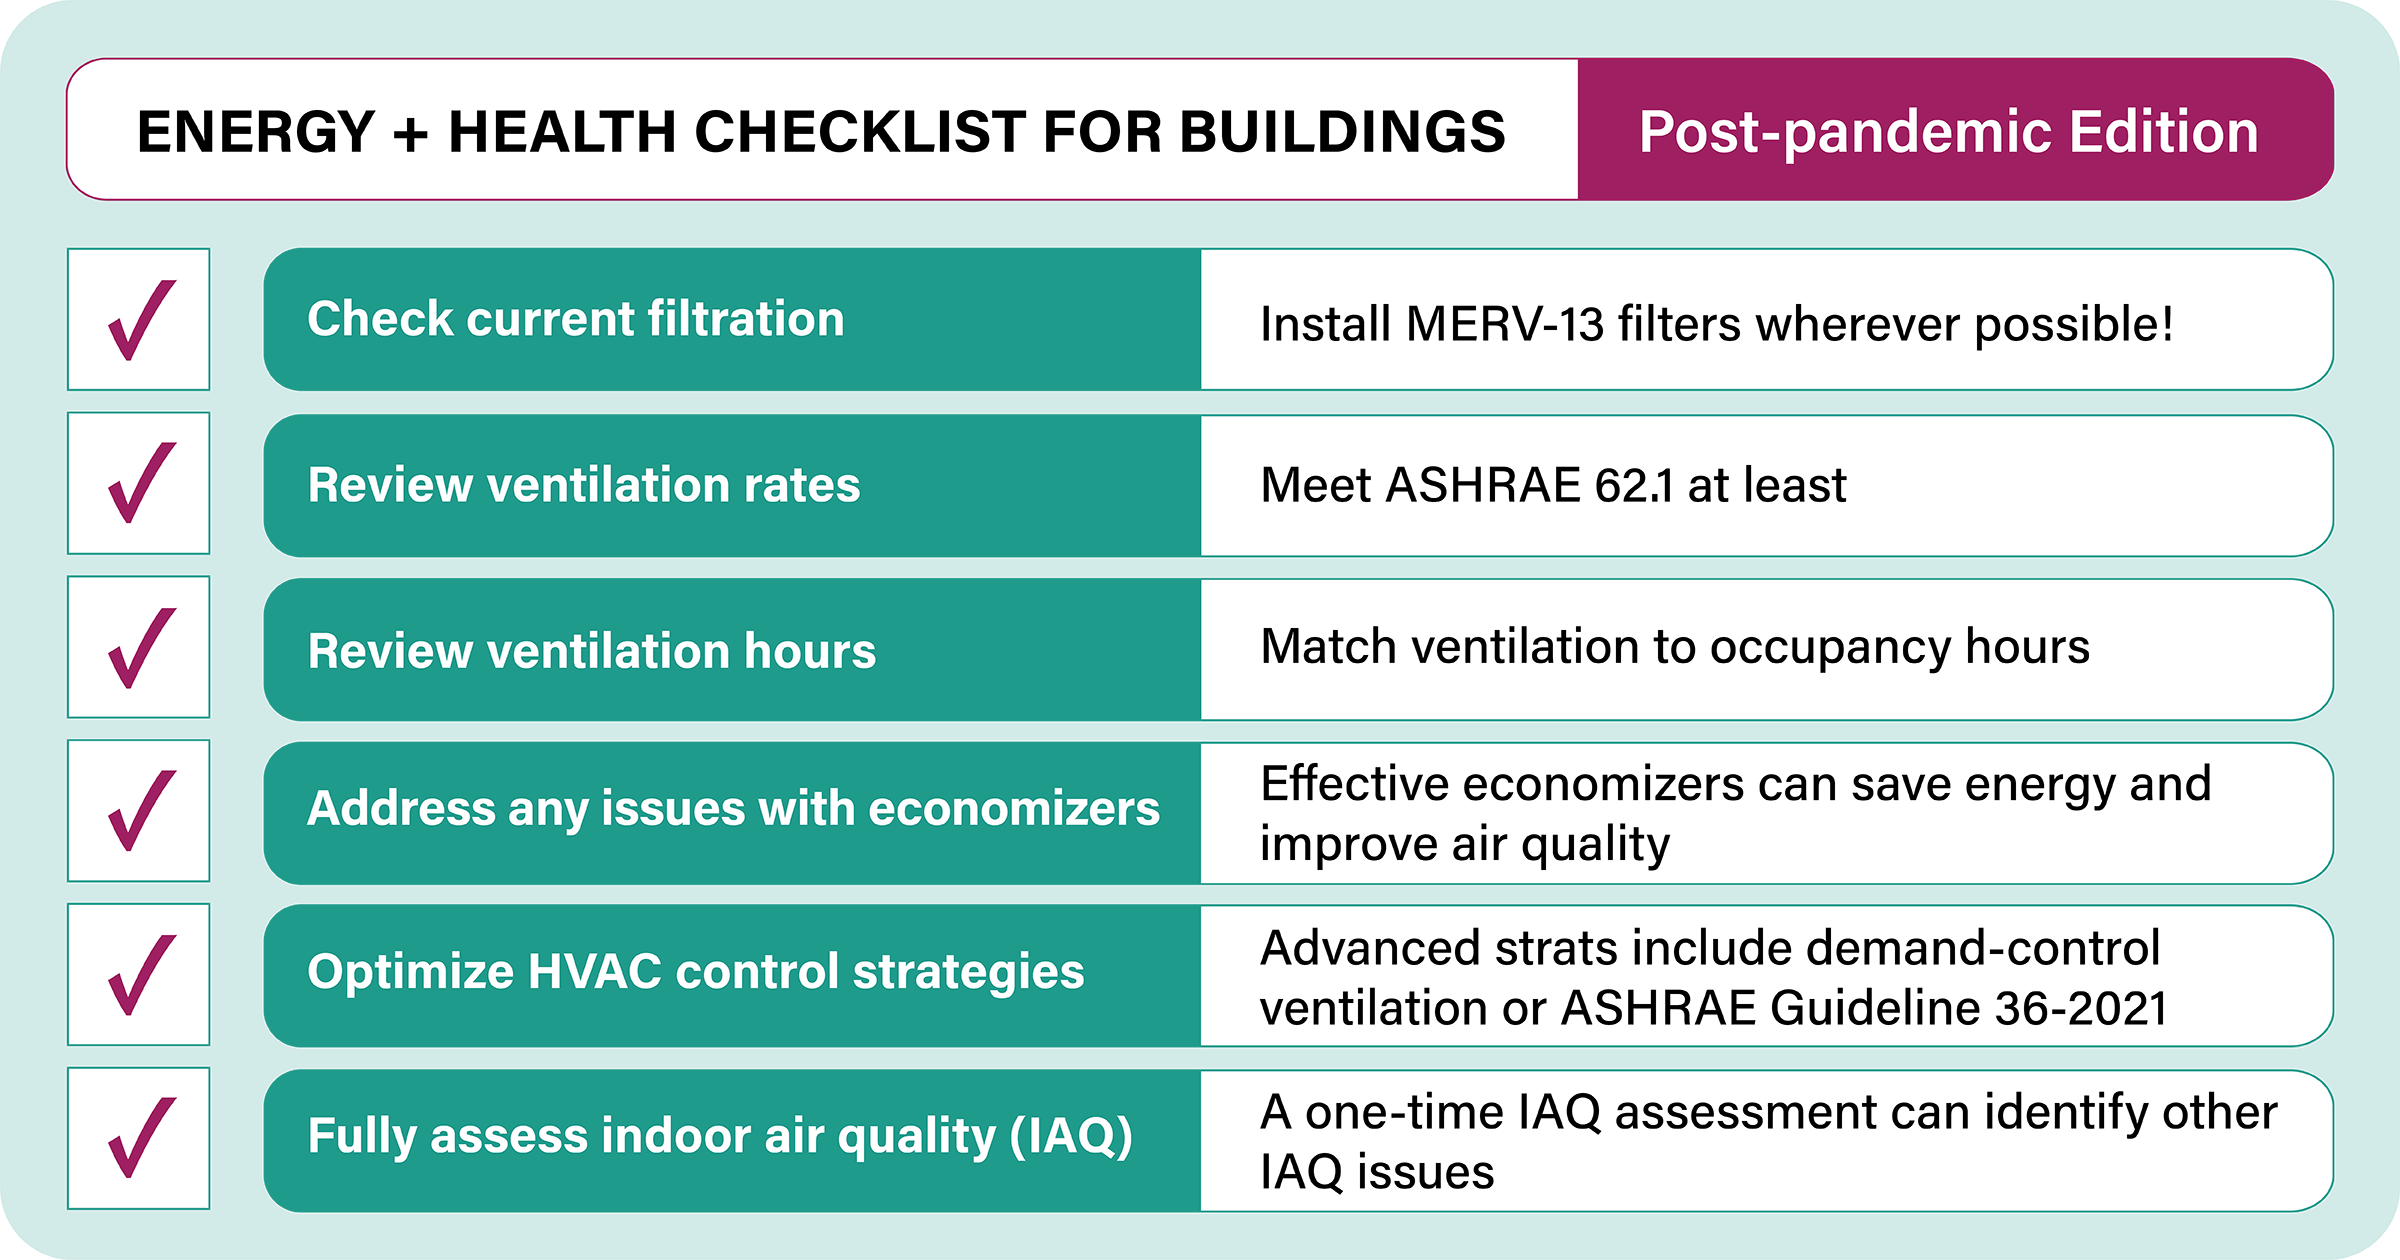 An infographic outlining measures that can help keep buildings safer